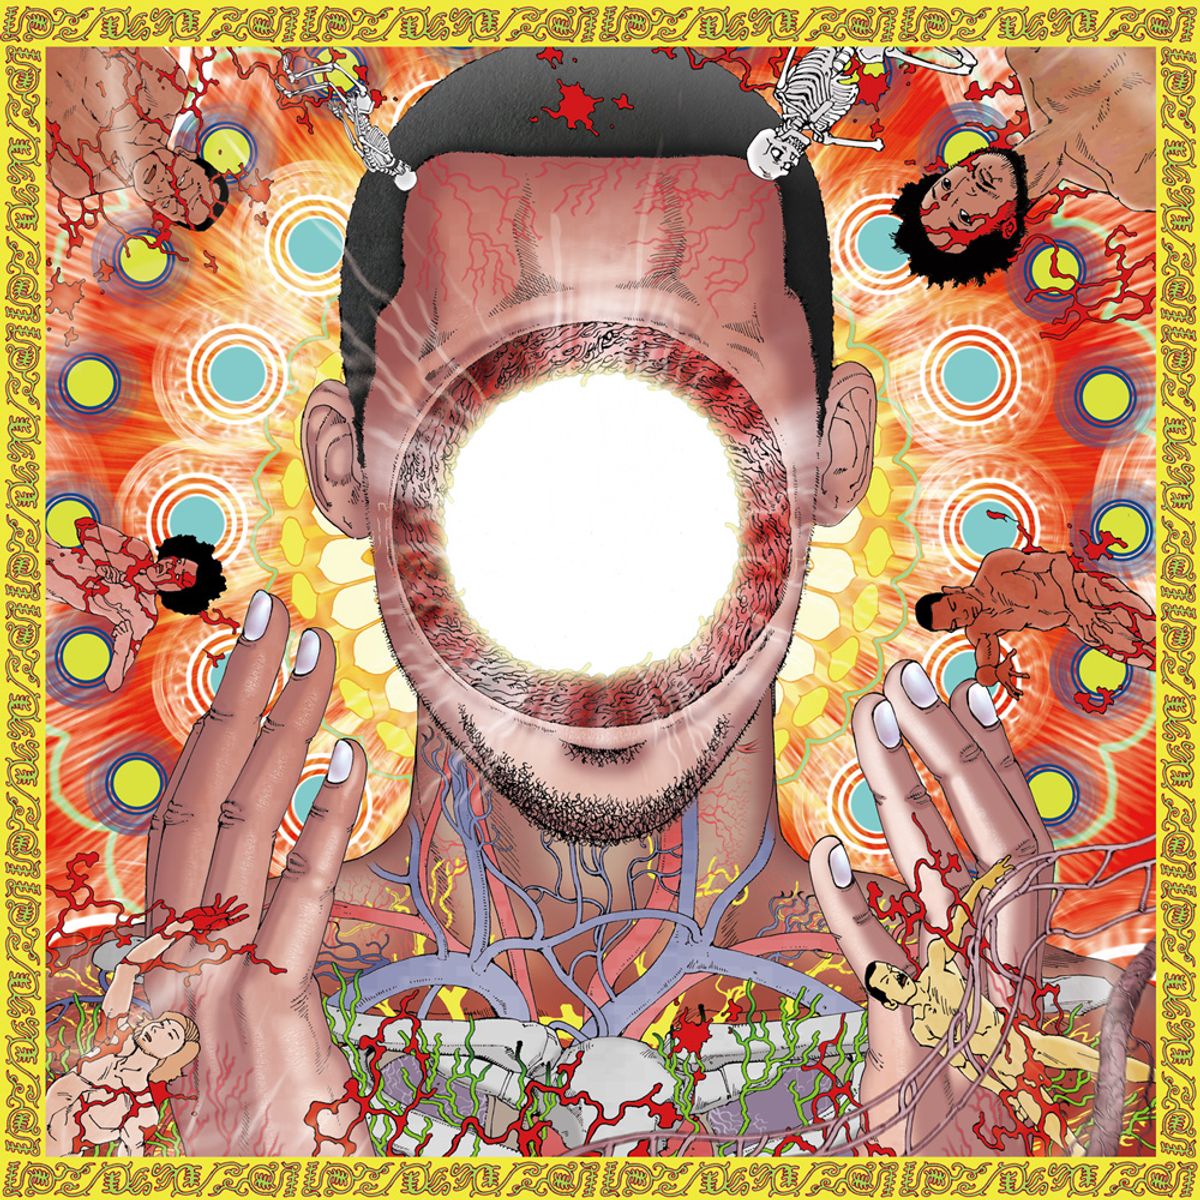 This CD cover image released by Warp Records shows "You're Dead!," by Flying Lotus.  (AP Photo/Warp Records)